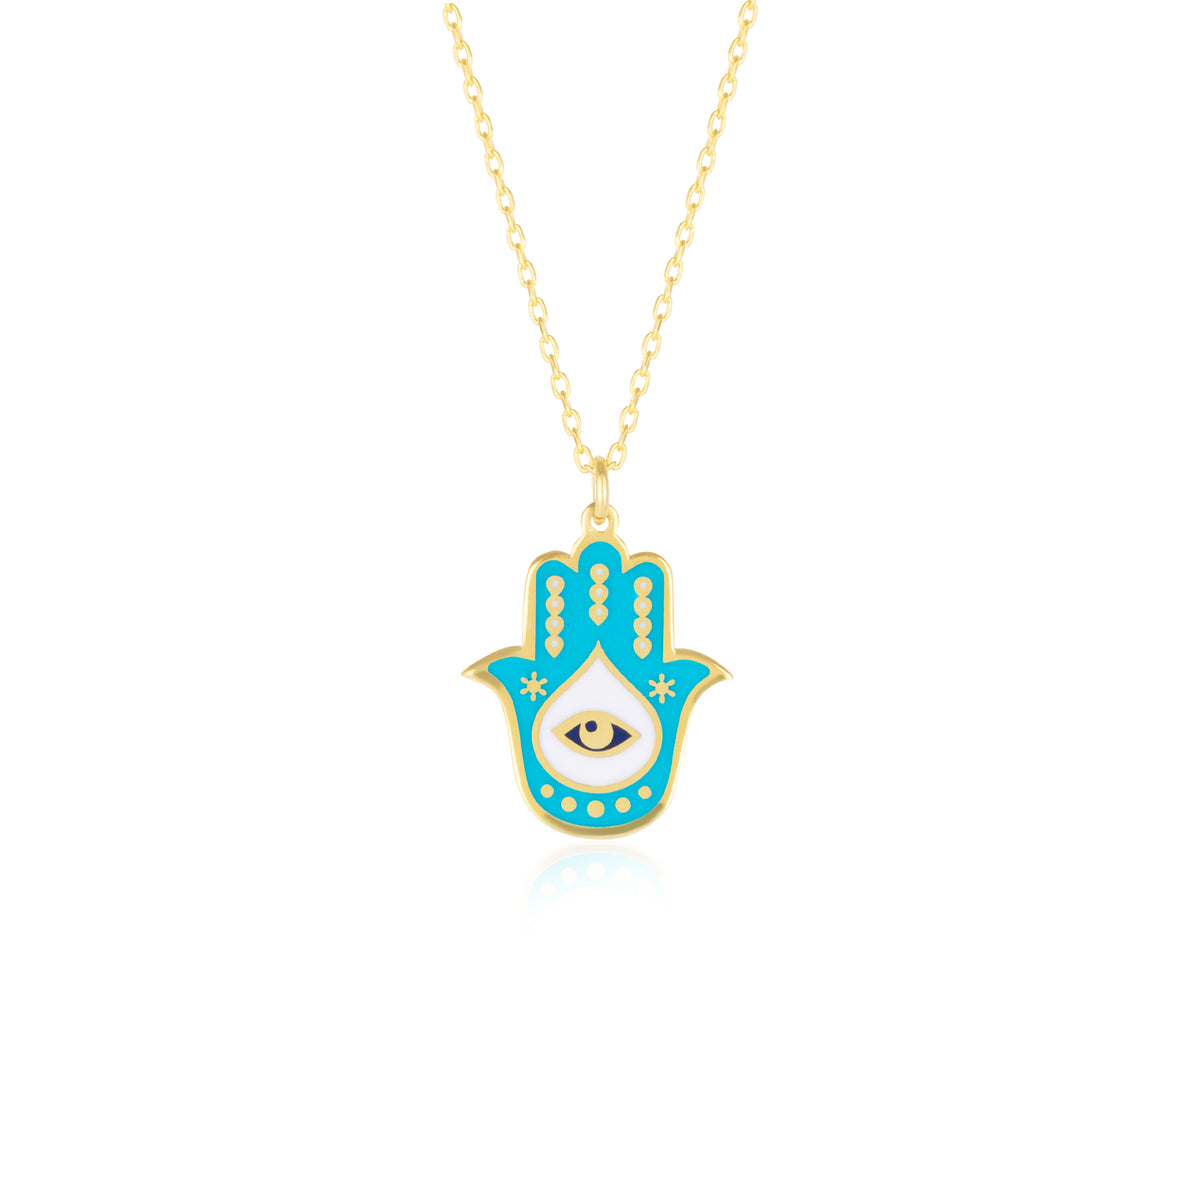 Authentic Turquoise Color Hamsa Hand Necklace Sterling Silver